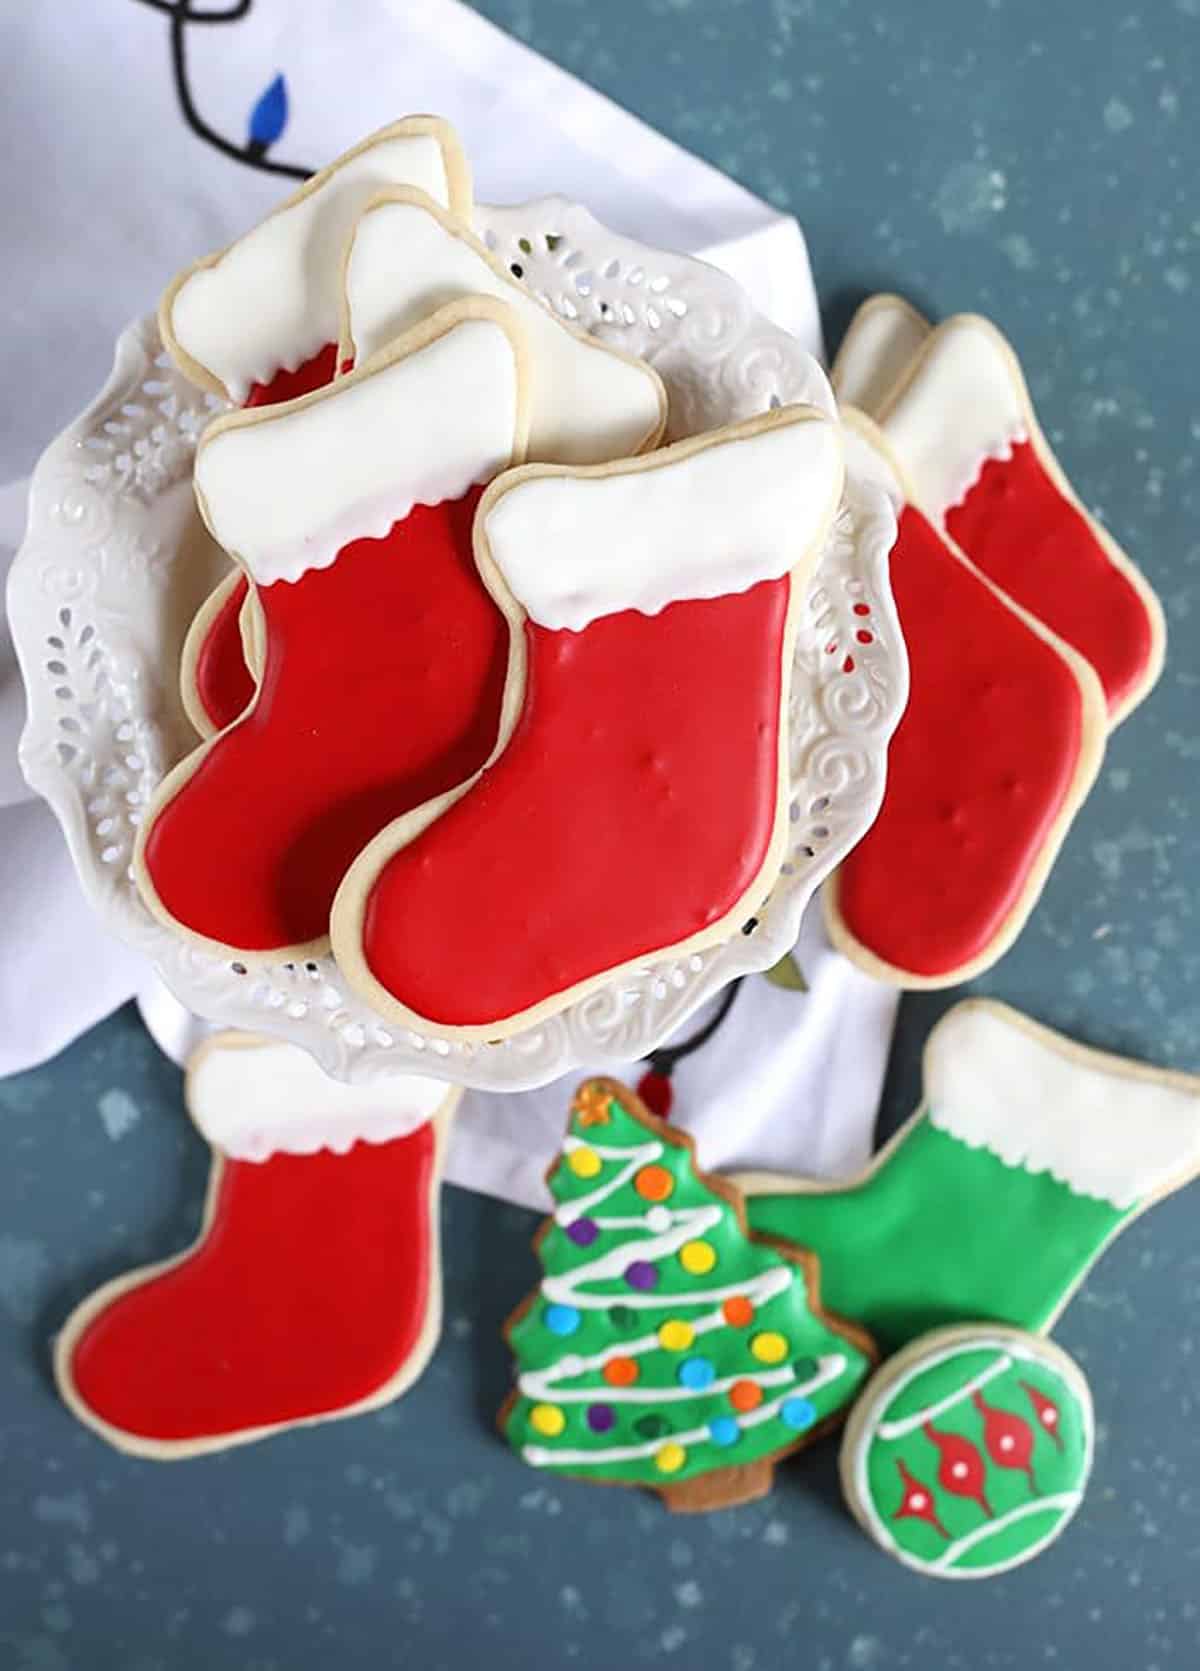 Stocking cut out cookies on a cake plate with a christmas tree cookie on a blue background.